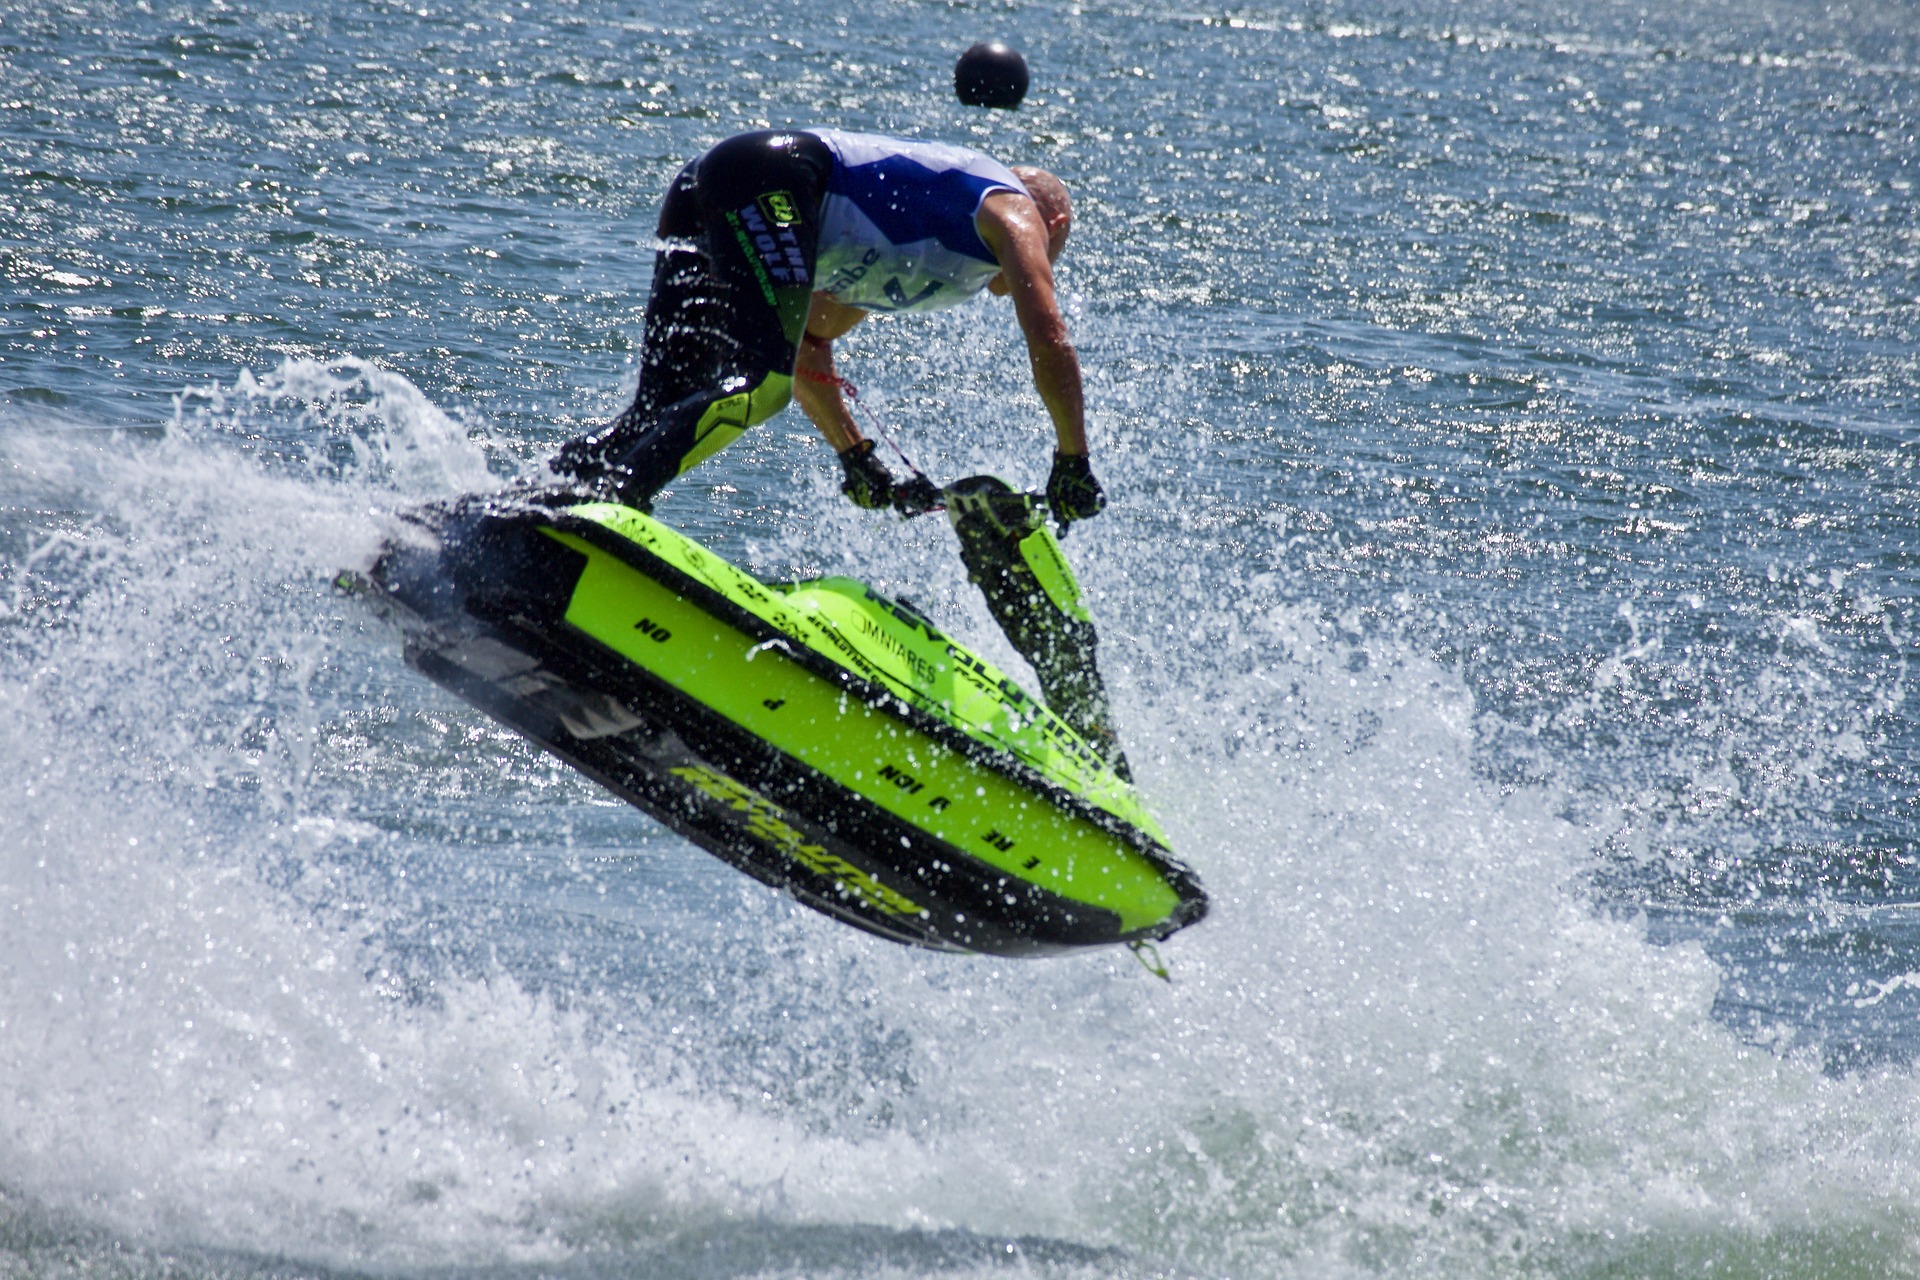 Travelers can enjoy a thrilling day of jet skiing in Cape Coral.